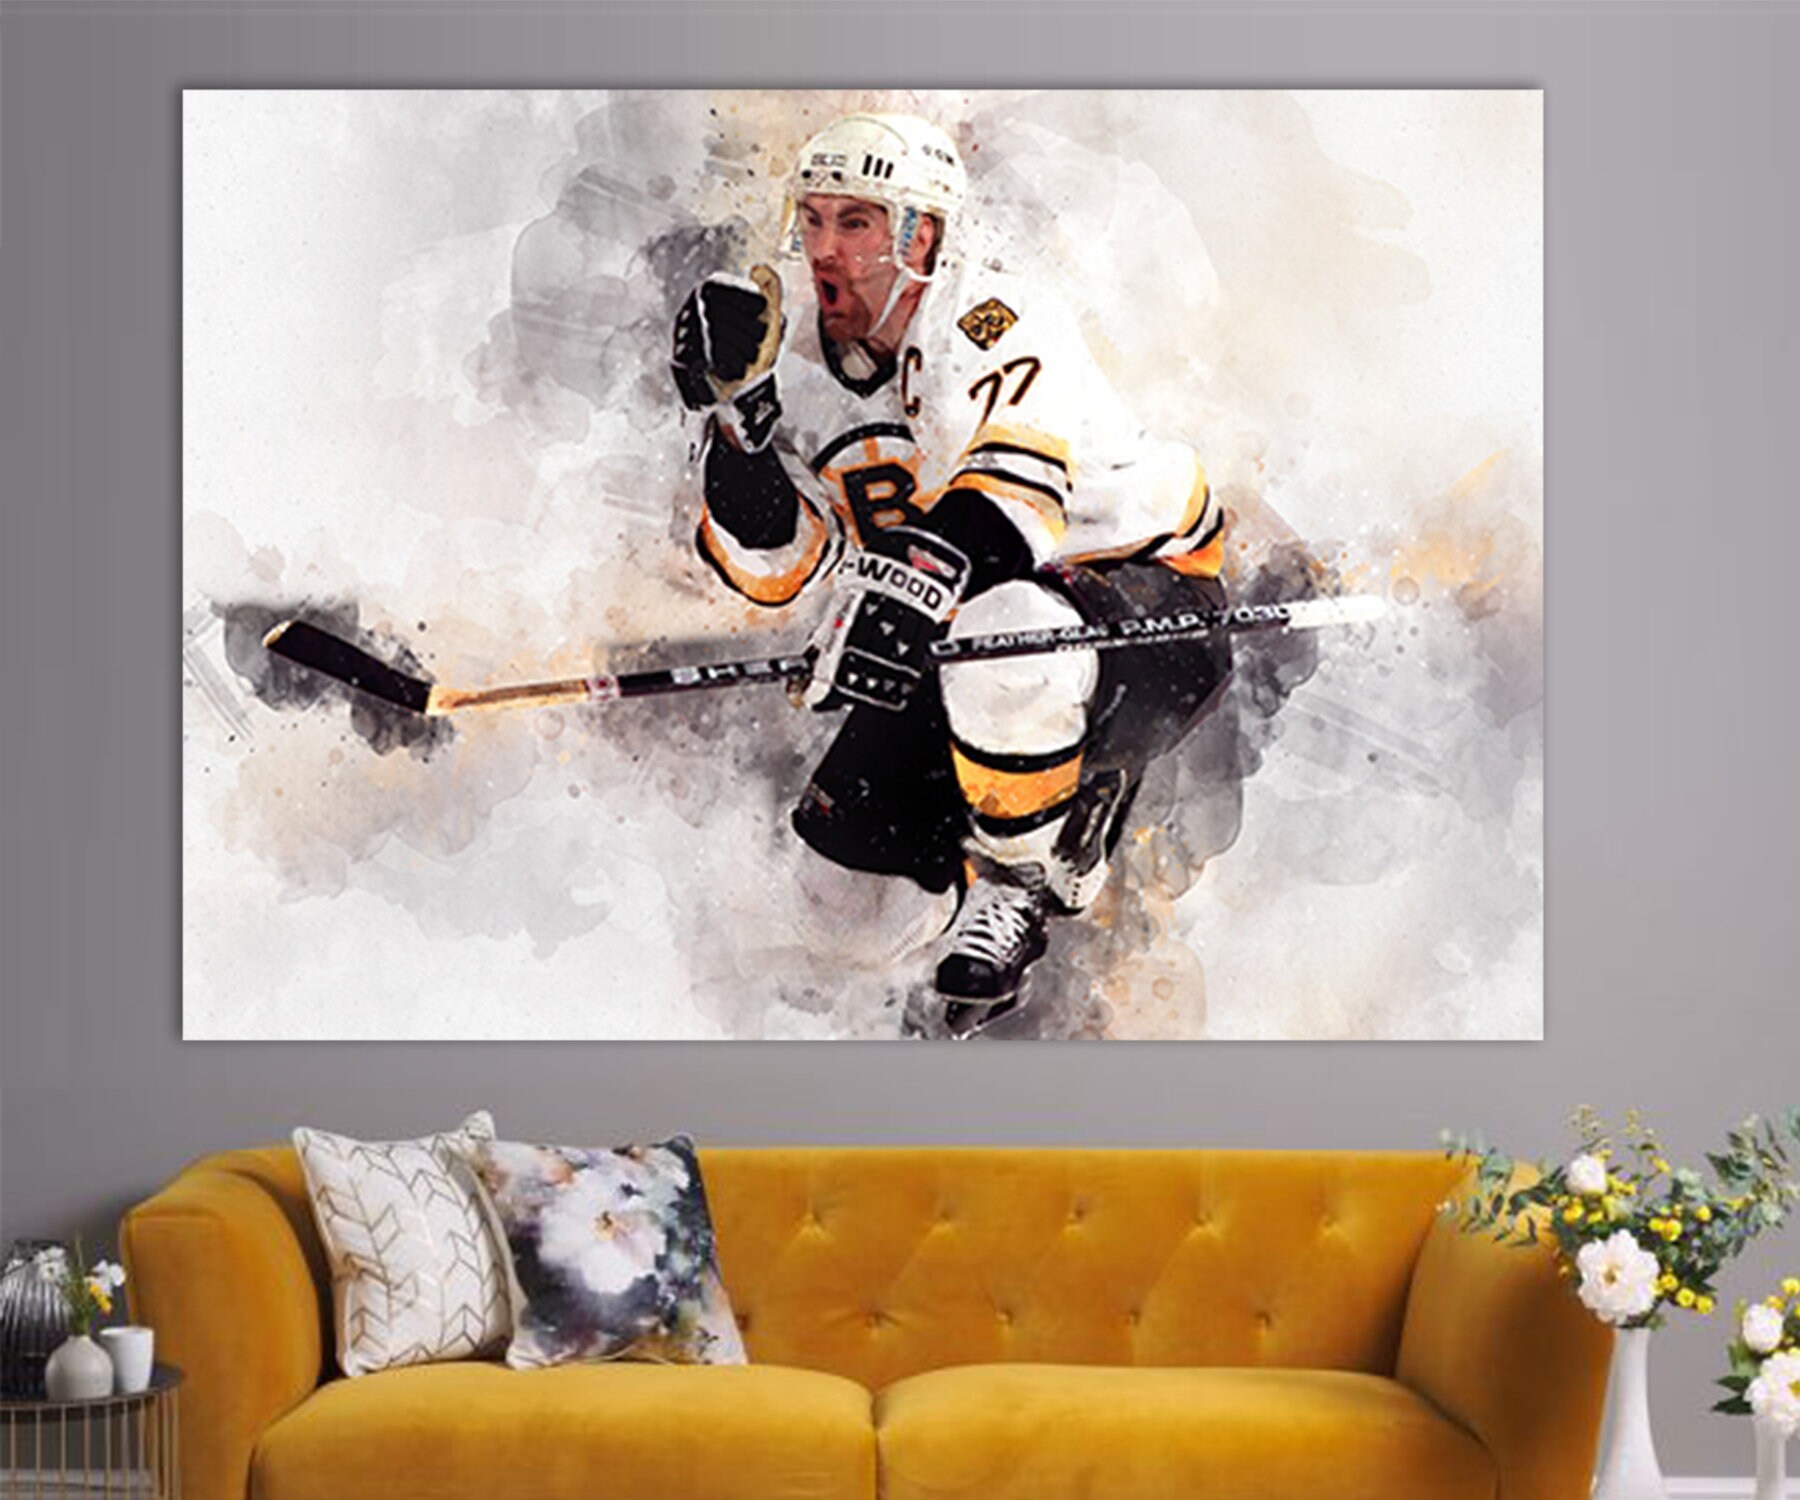 Ray Bourque editorial stock photo. Image of visible, sports - 49935163